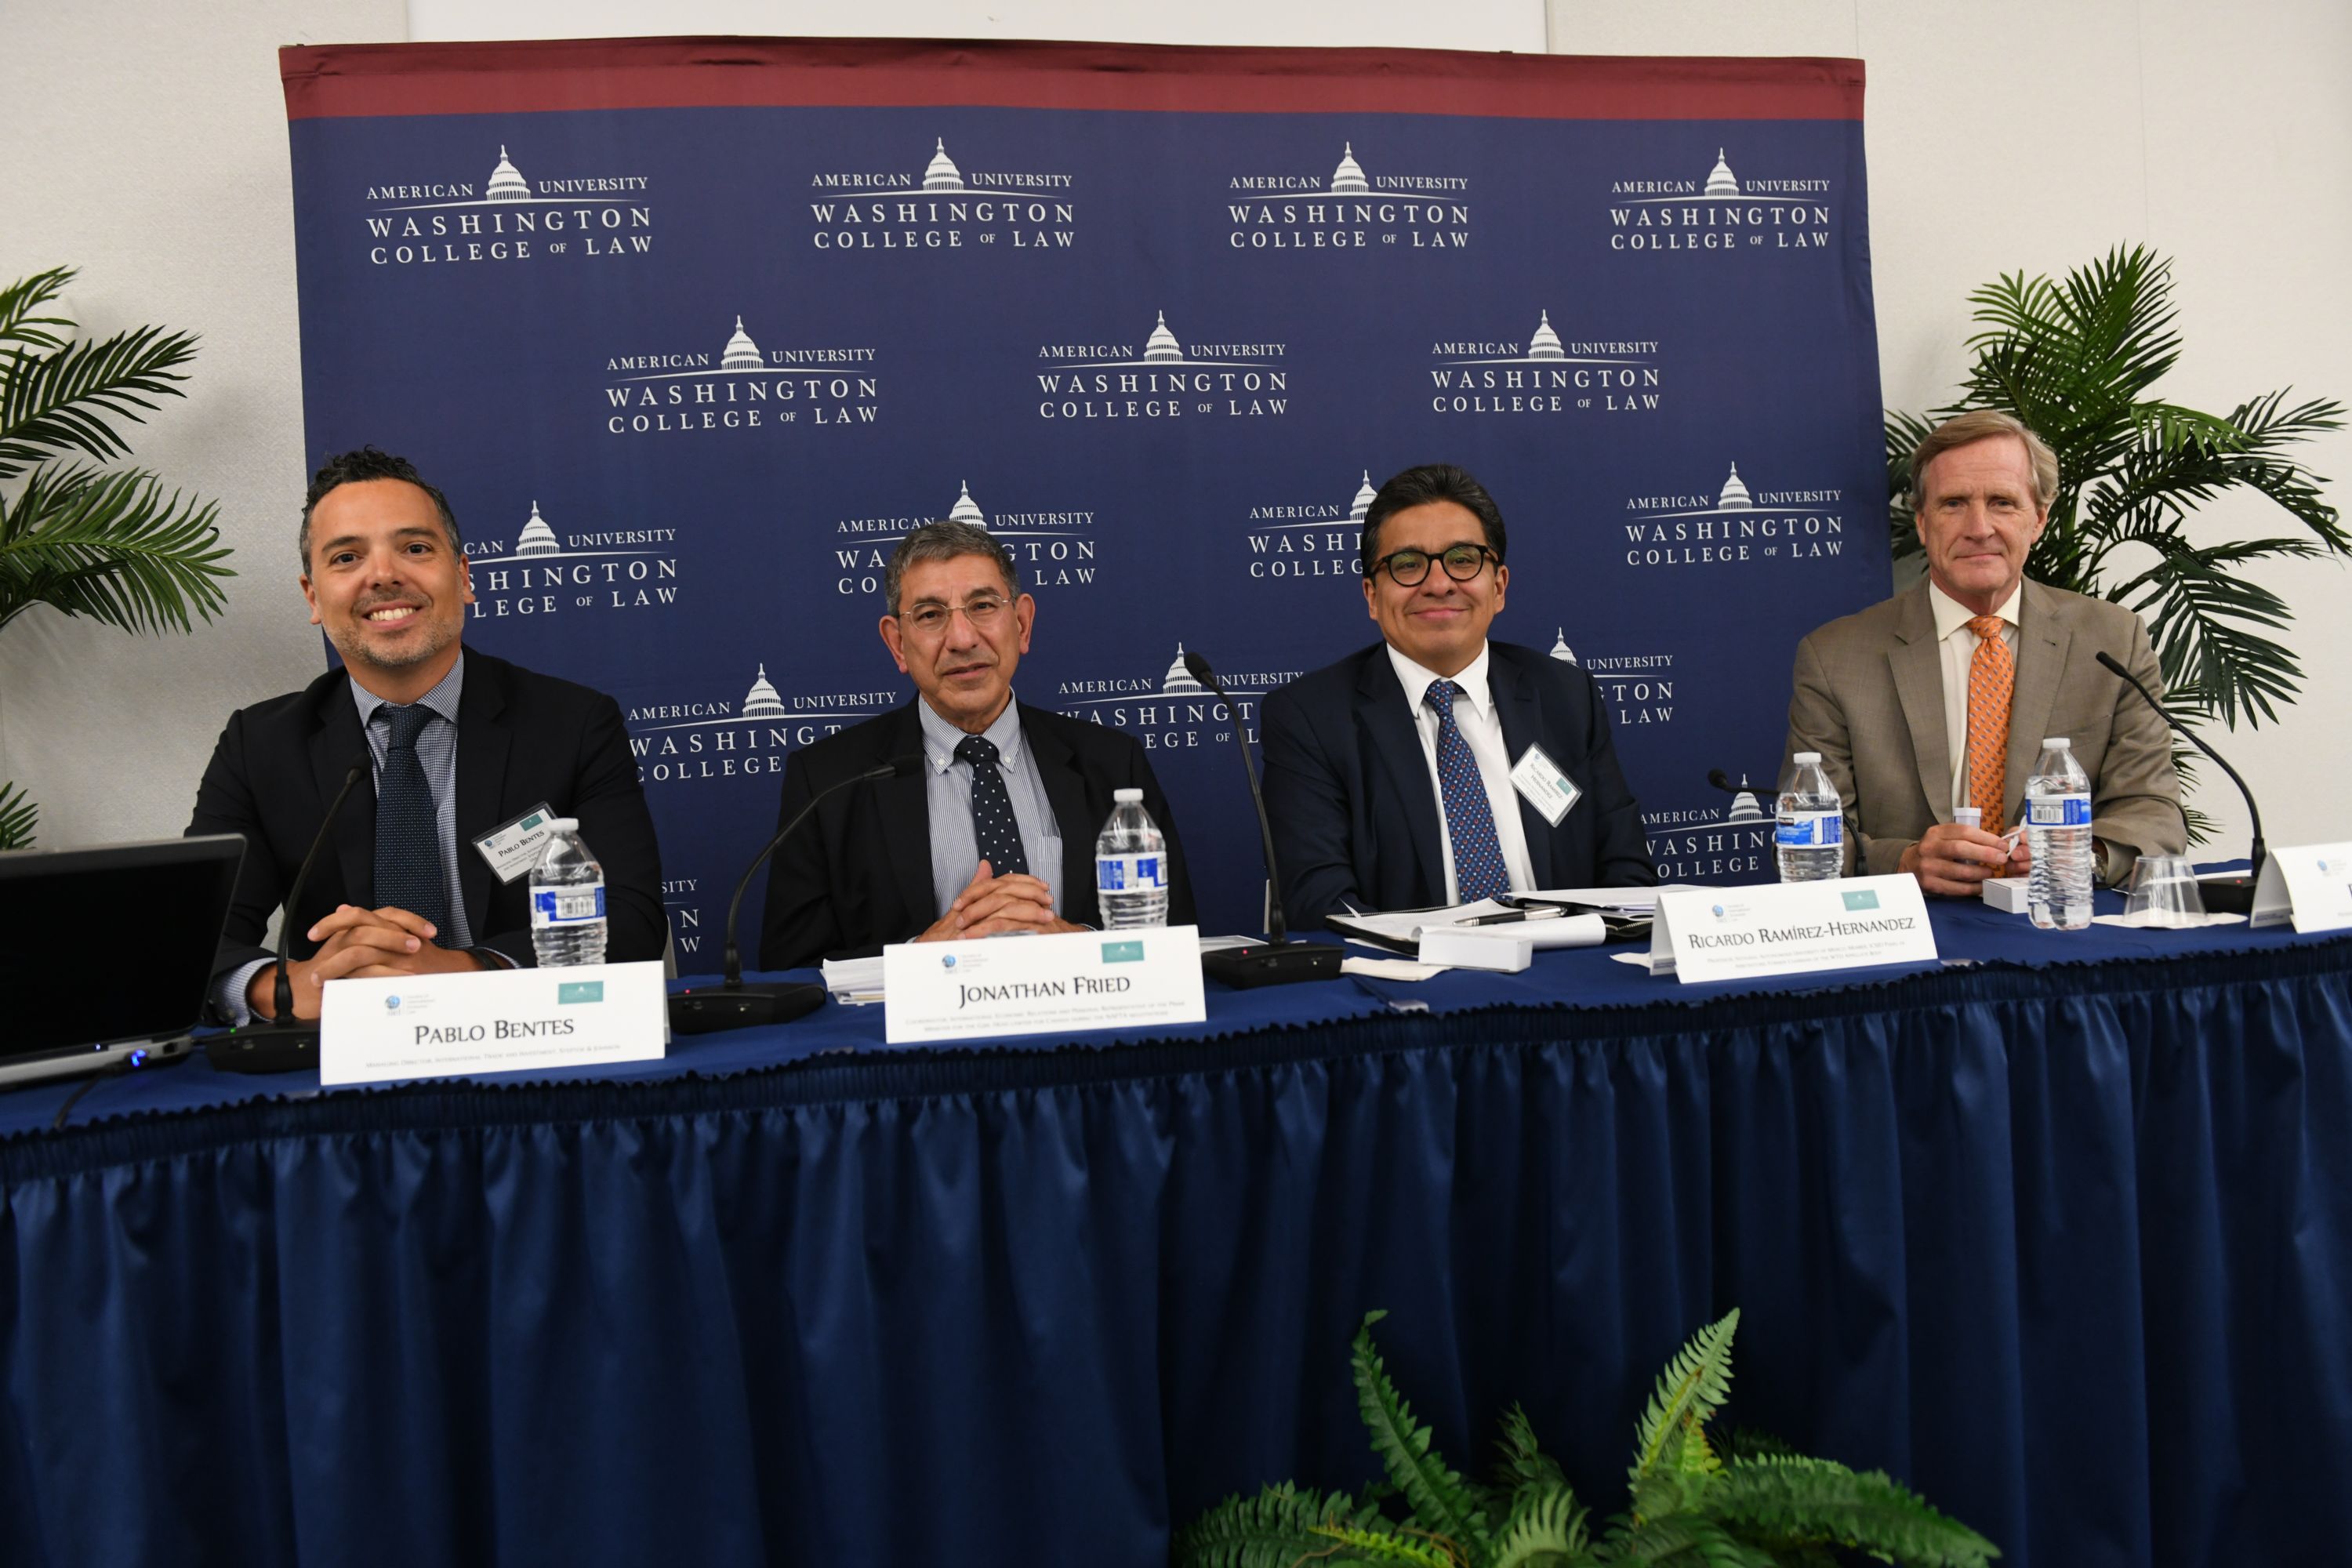 Panel on “The NAFTA State of Play and the Implications Arising from the New Rules”. Left to right: Pablo Bentes, Managing Director, International Trade and Investment, Steptoe & Johnson, Jonathan Fried, Head lawyer for Canada during the NAFTA negotiations, Ricardo  Ramirez-Hernandez, Former Chairman of the WTO Appellate Body, and Rufus Yerxa, President, National Foreign Trade Council, Washington, DC.